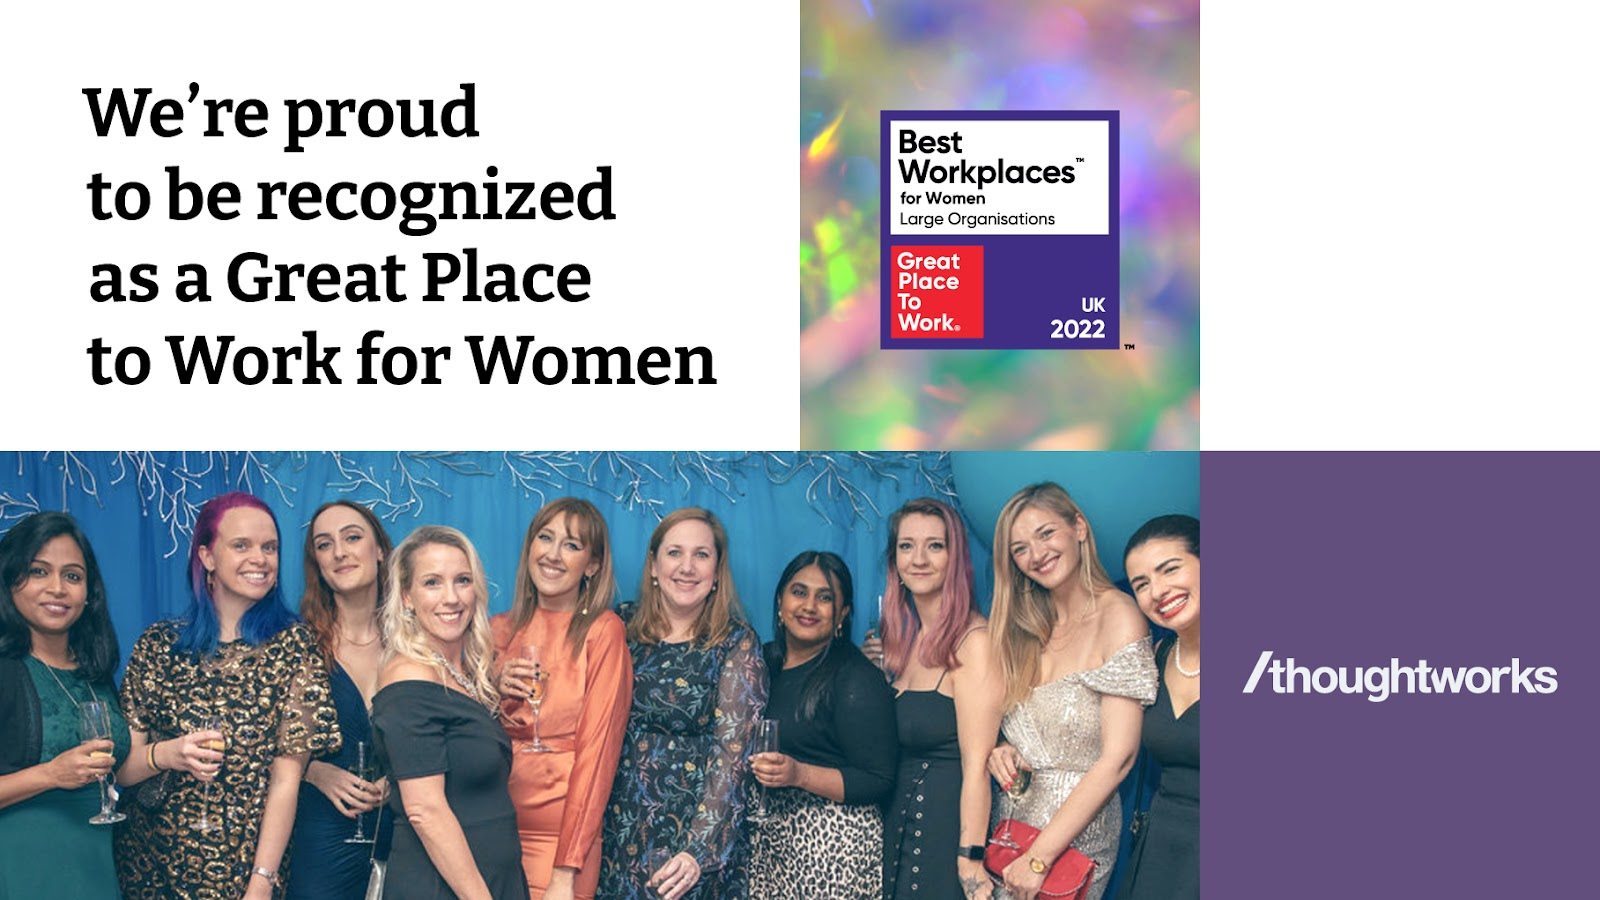 Thoughtworks announced best workplace for women™ by Great Place to Work UK